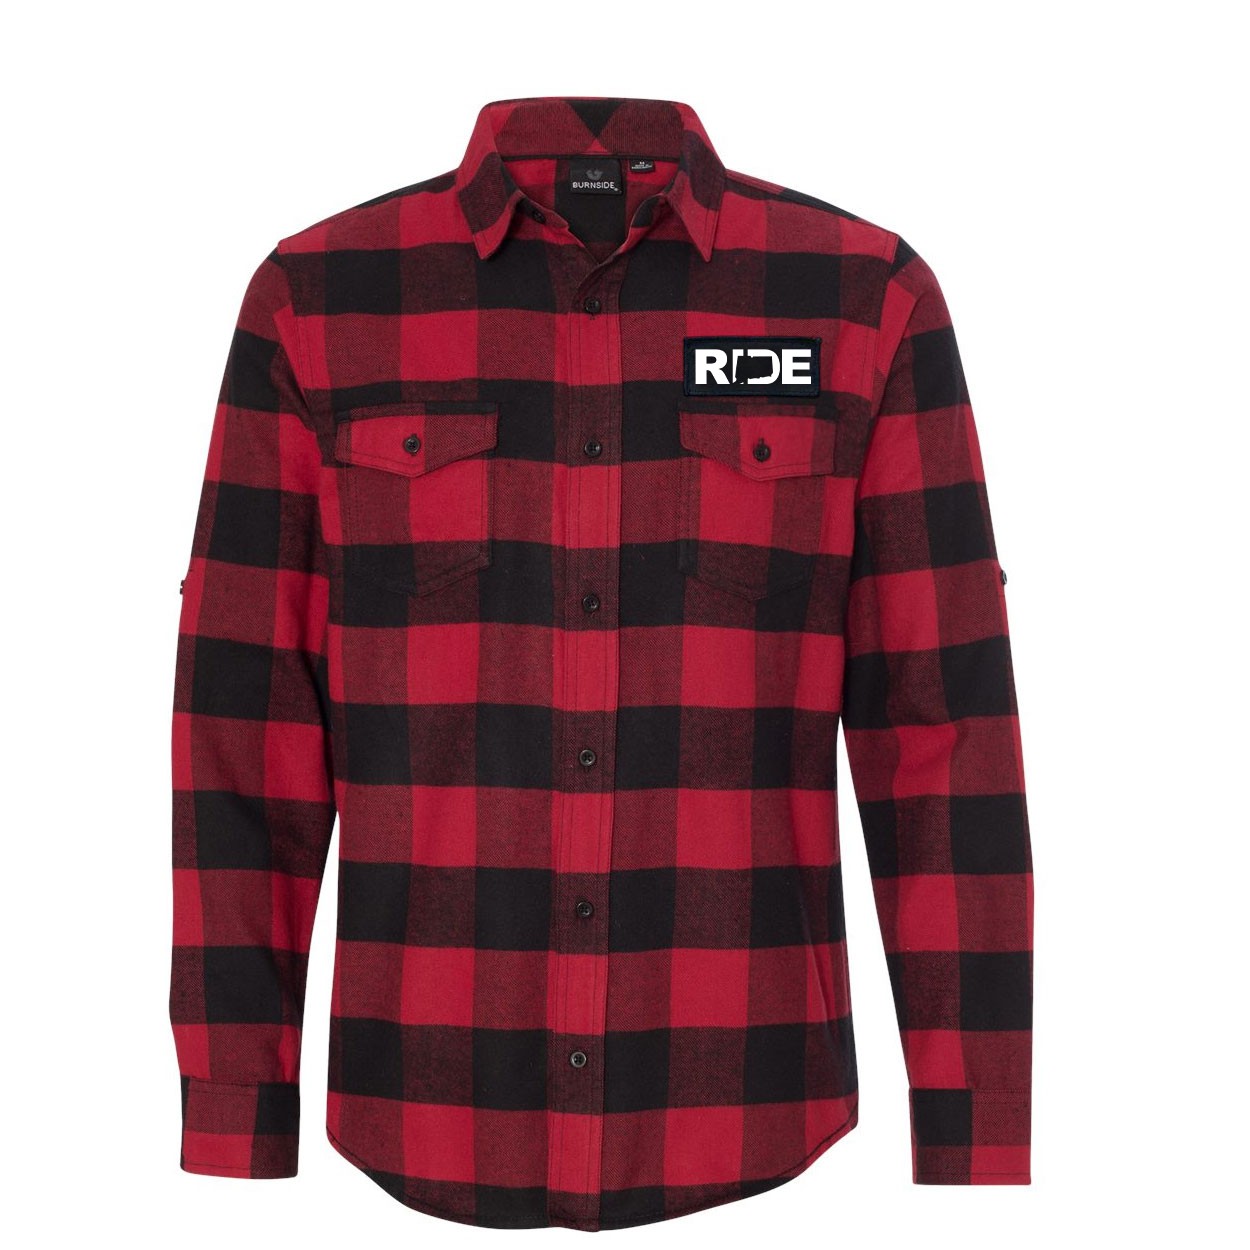 Ride Connecticut Classic Unisex Long Sleeve Woven Patch Flannel Shirt Red/Black Buffalo (White Logo)